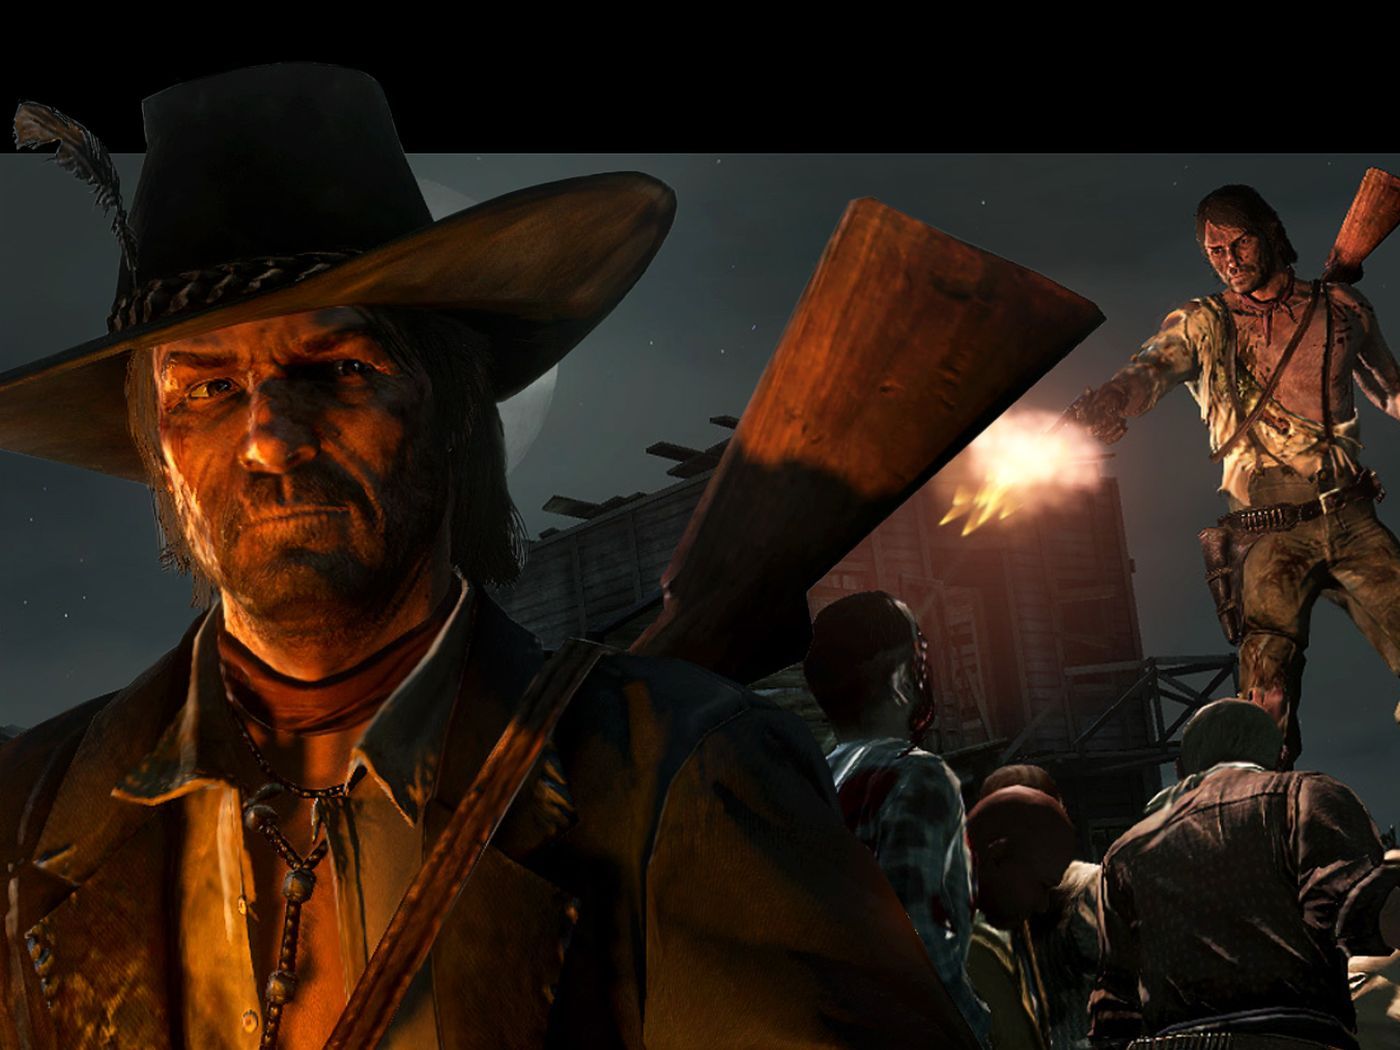 Red Dead Redemption's Undead Nightmare .polygon.com